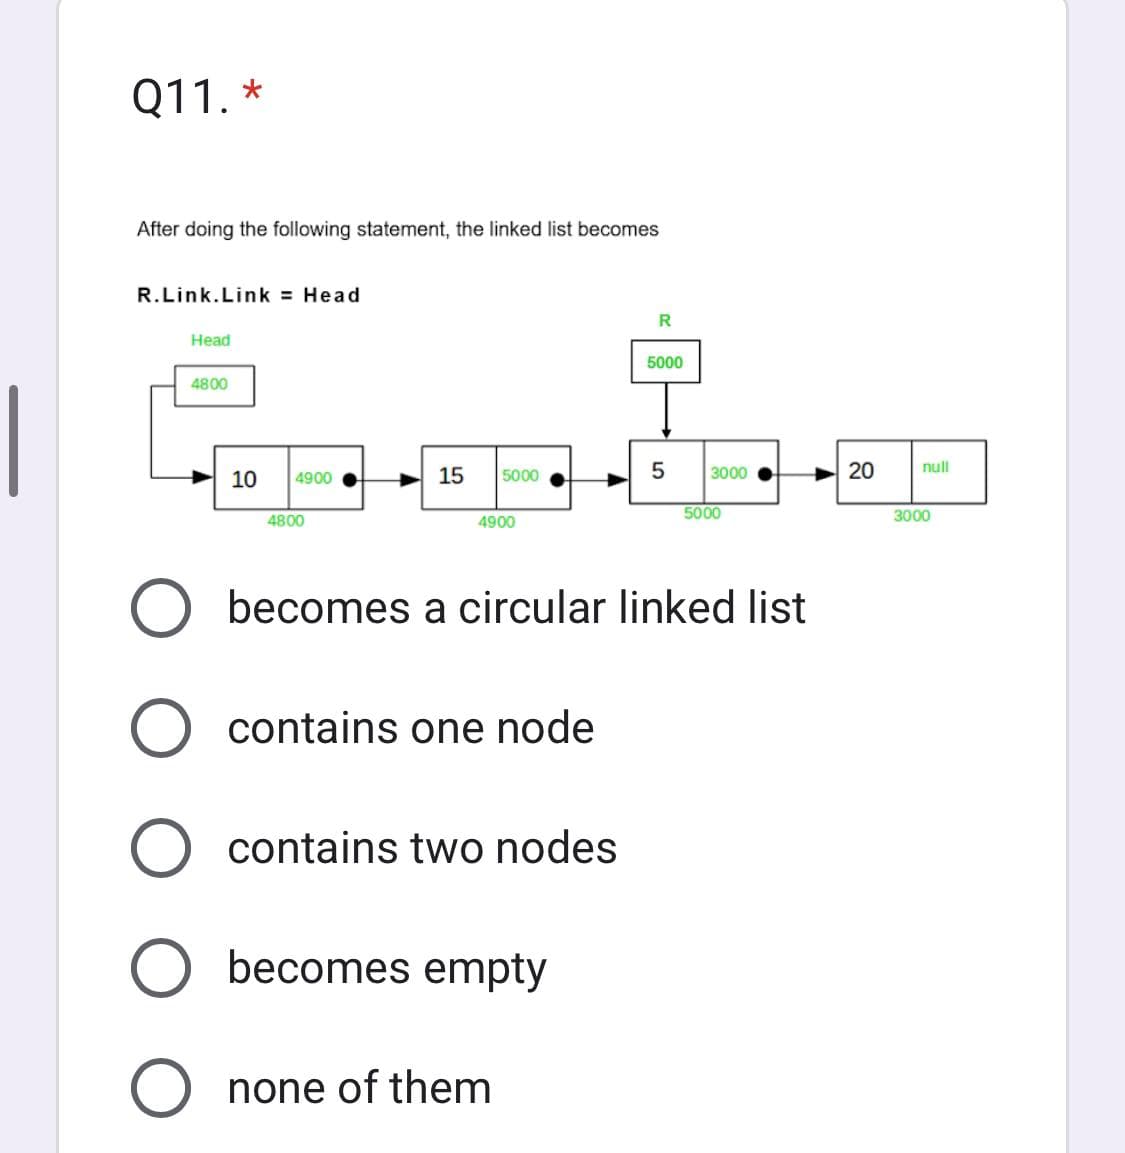 Q11. *
After doing the following statement, the linked list becomes
R.Link. Link = Head
Head
4800
10 4900
4800
15
5000
4900
O
O contains one node
O contains two nodes
becomes empty
none of them
R
5000
5
3000
5000
becomes a circular linked list
20
null
3000